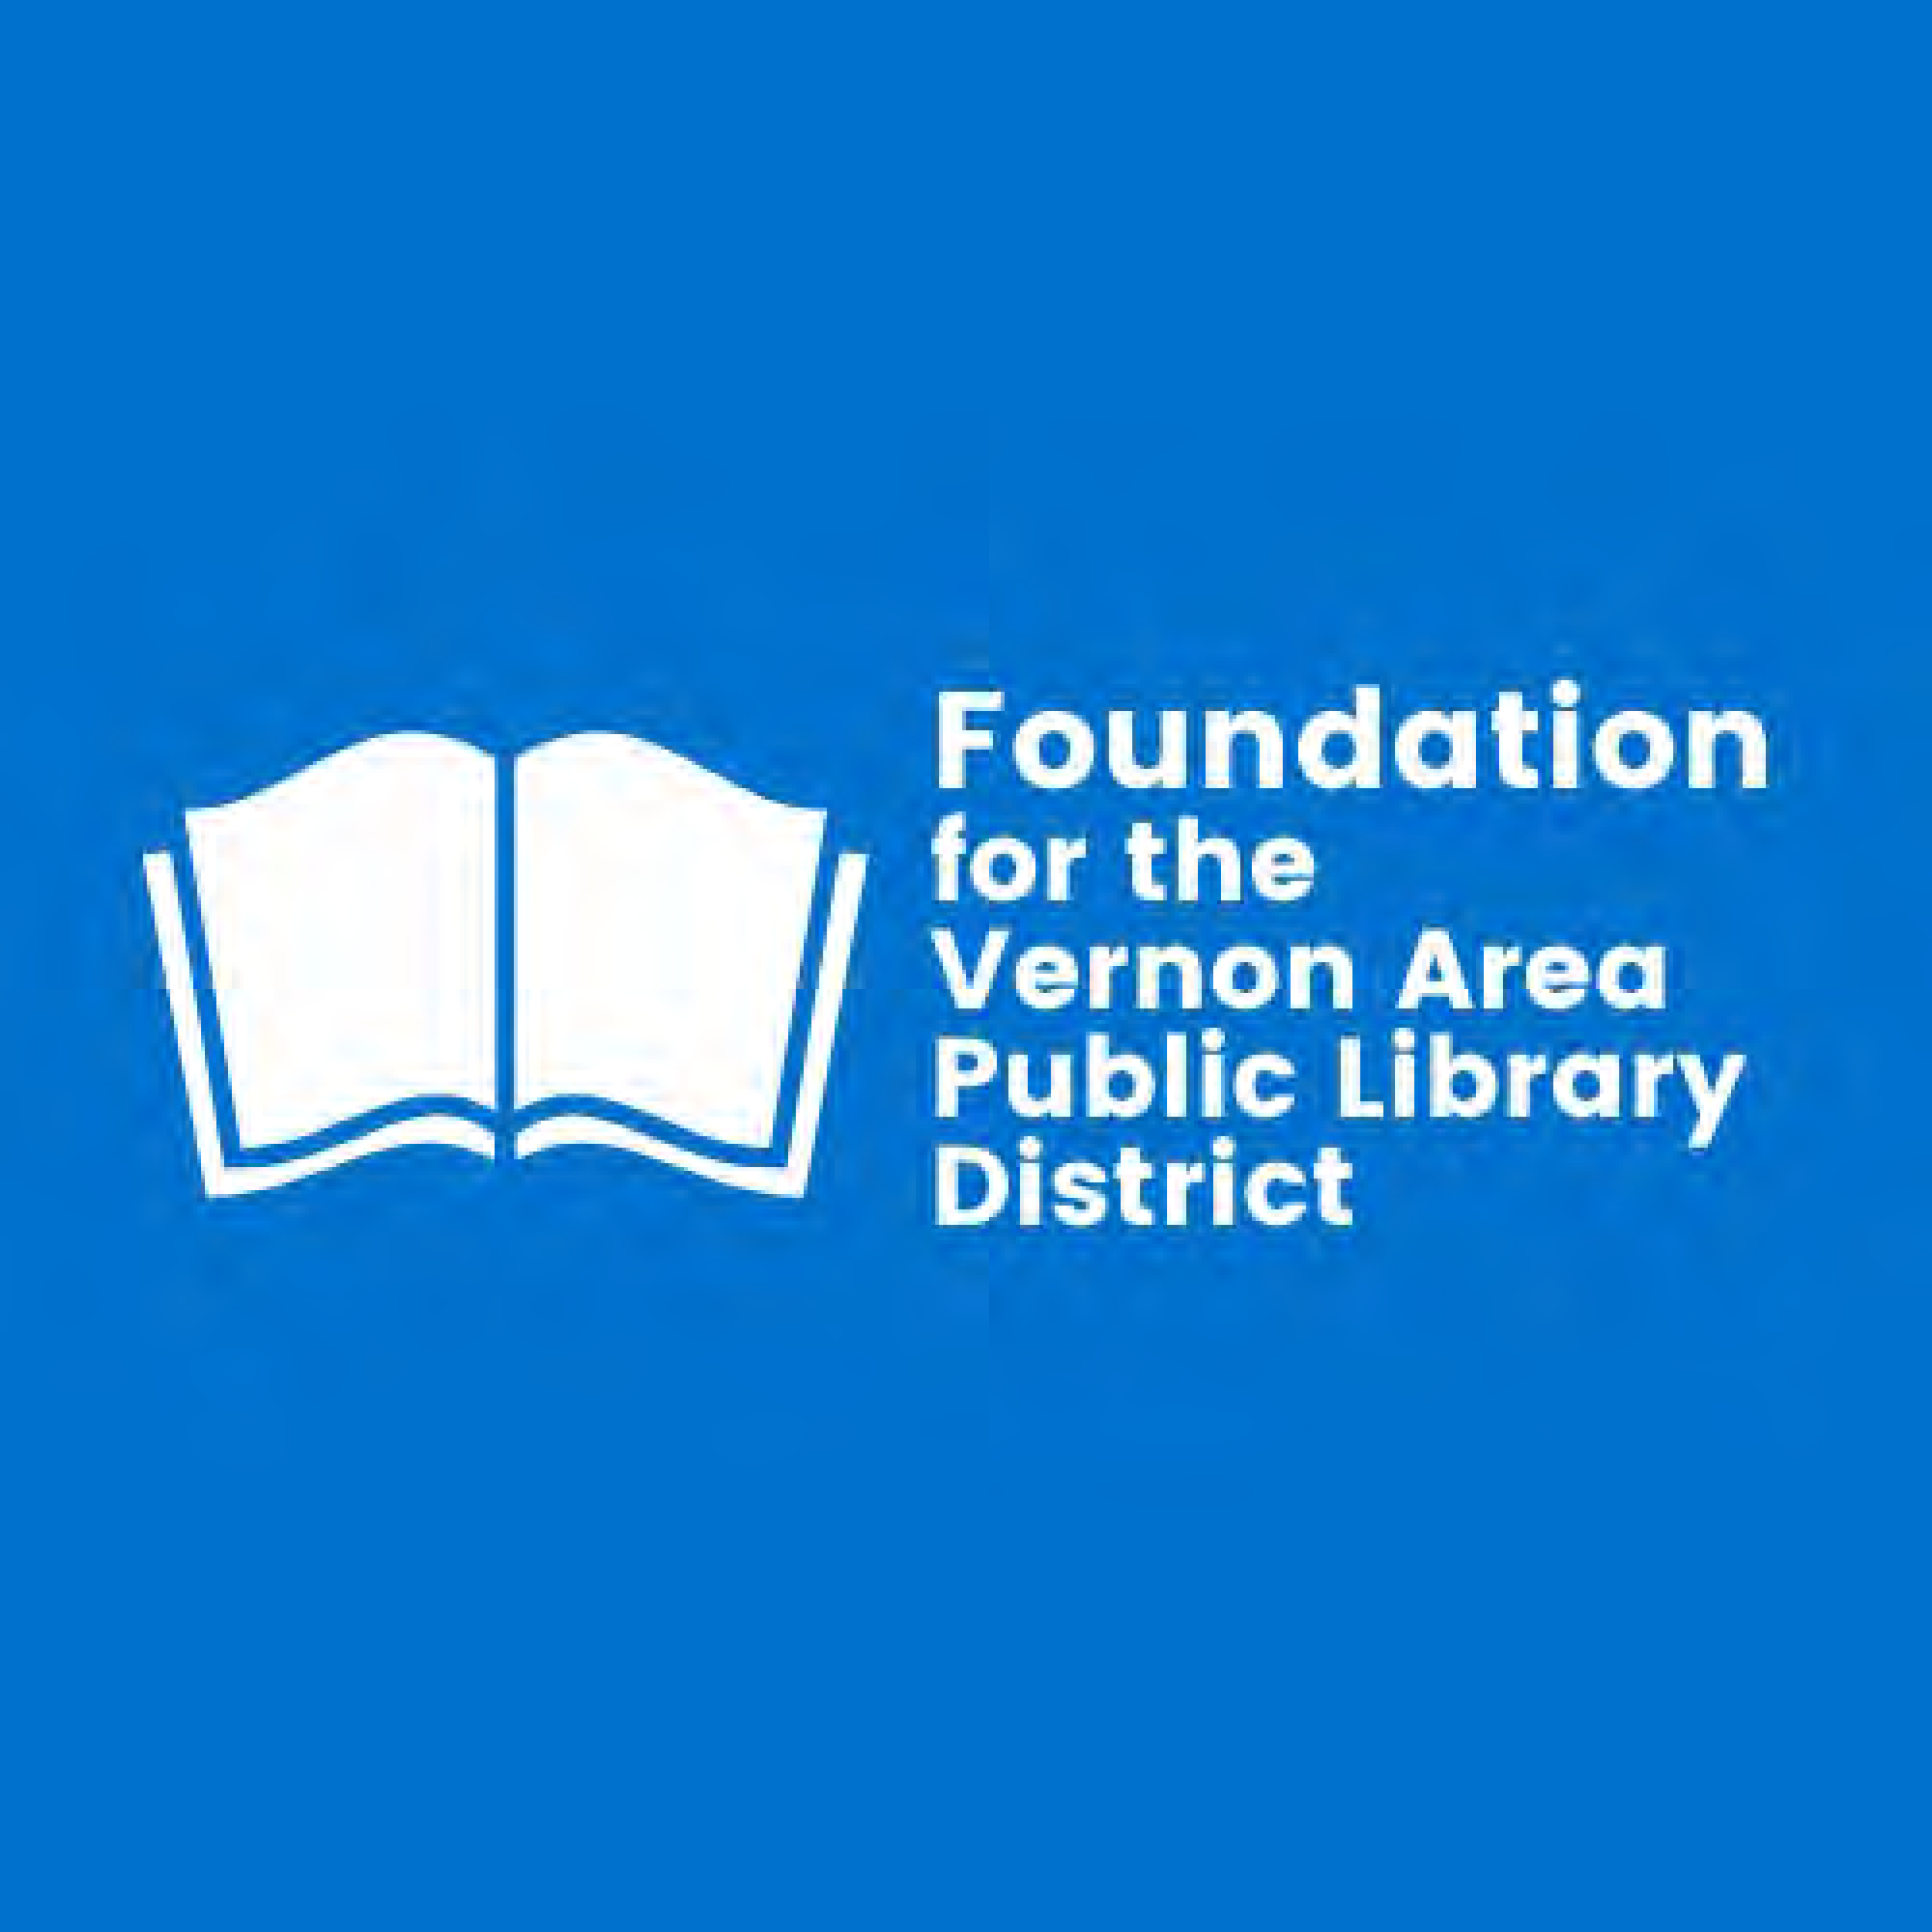 Logo of the Foundation for the Vernon Area Public Library District which consists of the foundation name and an icon of an open book